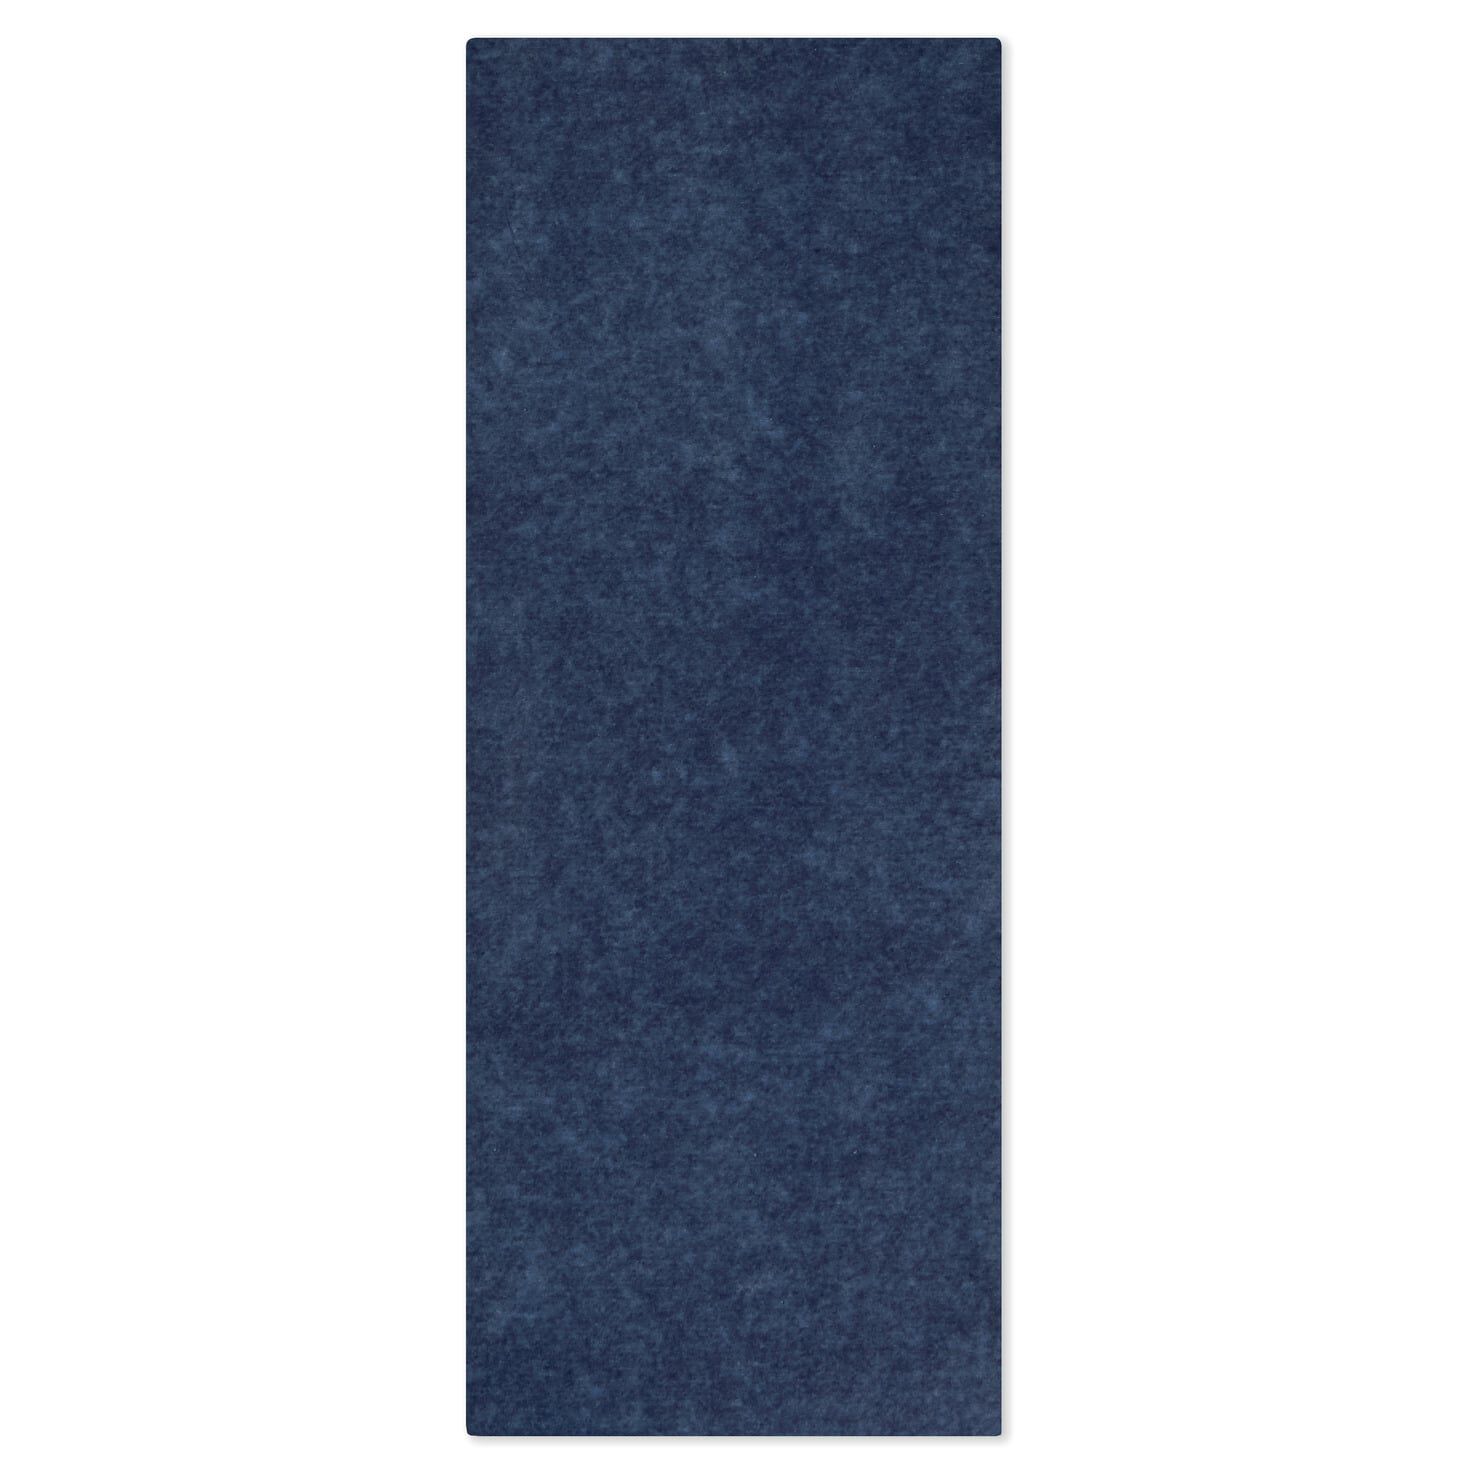 Navy Tissue Paper, 8 sheets for only USD 1.99 | Hallmark